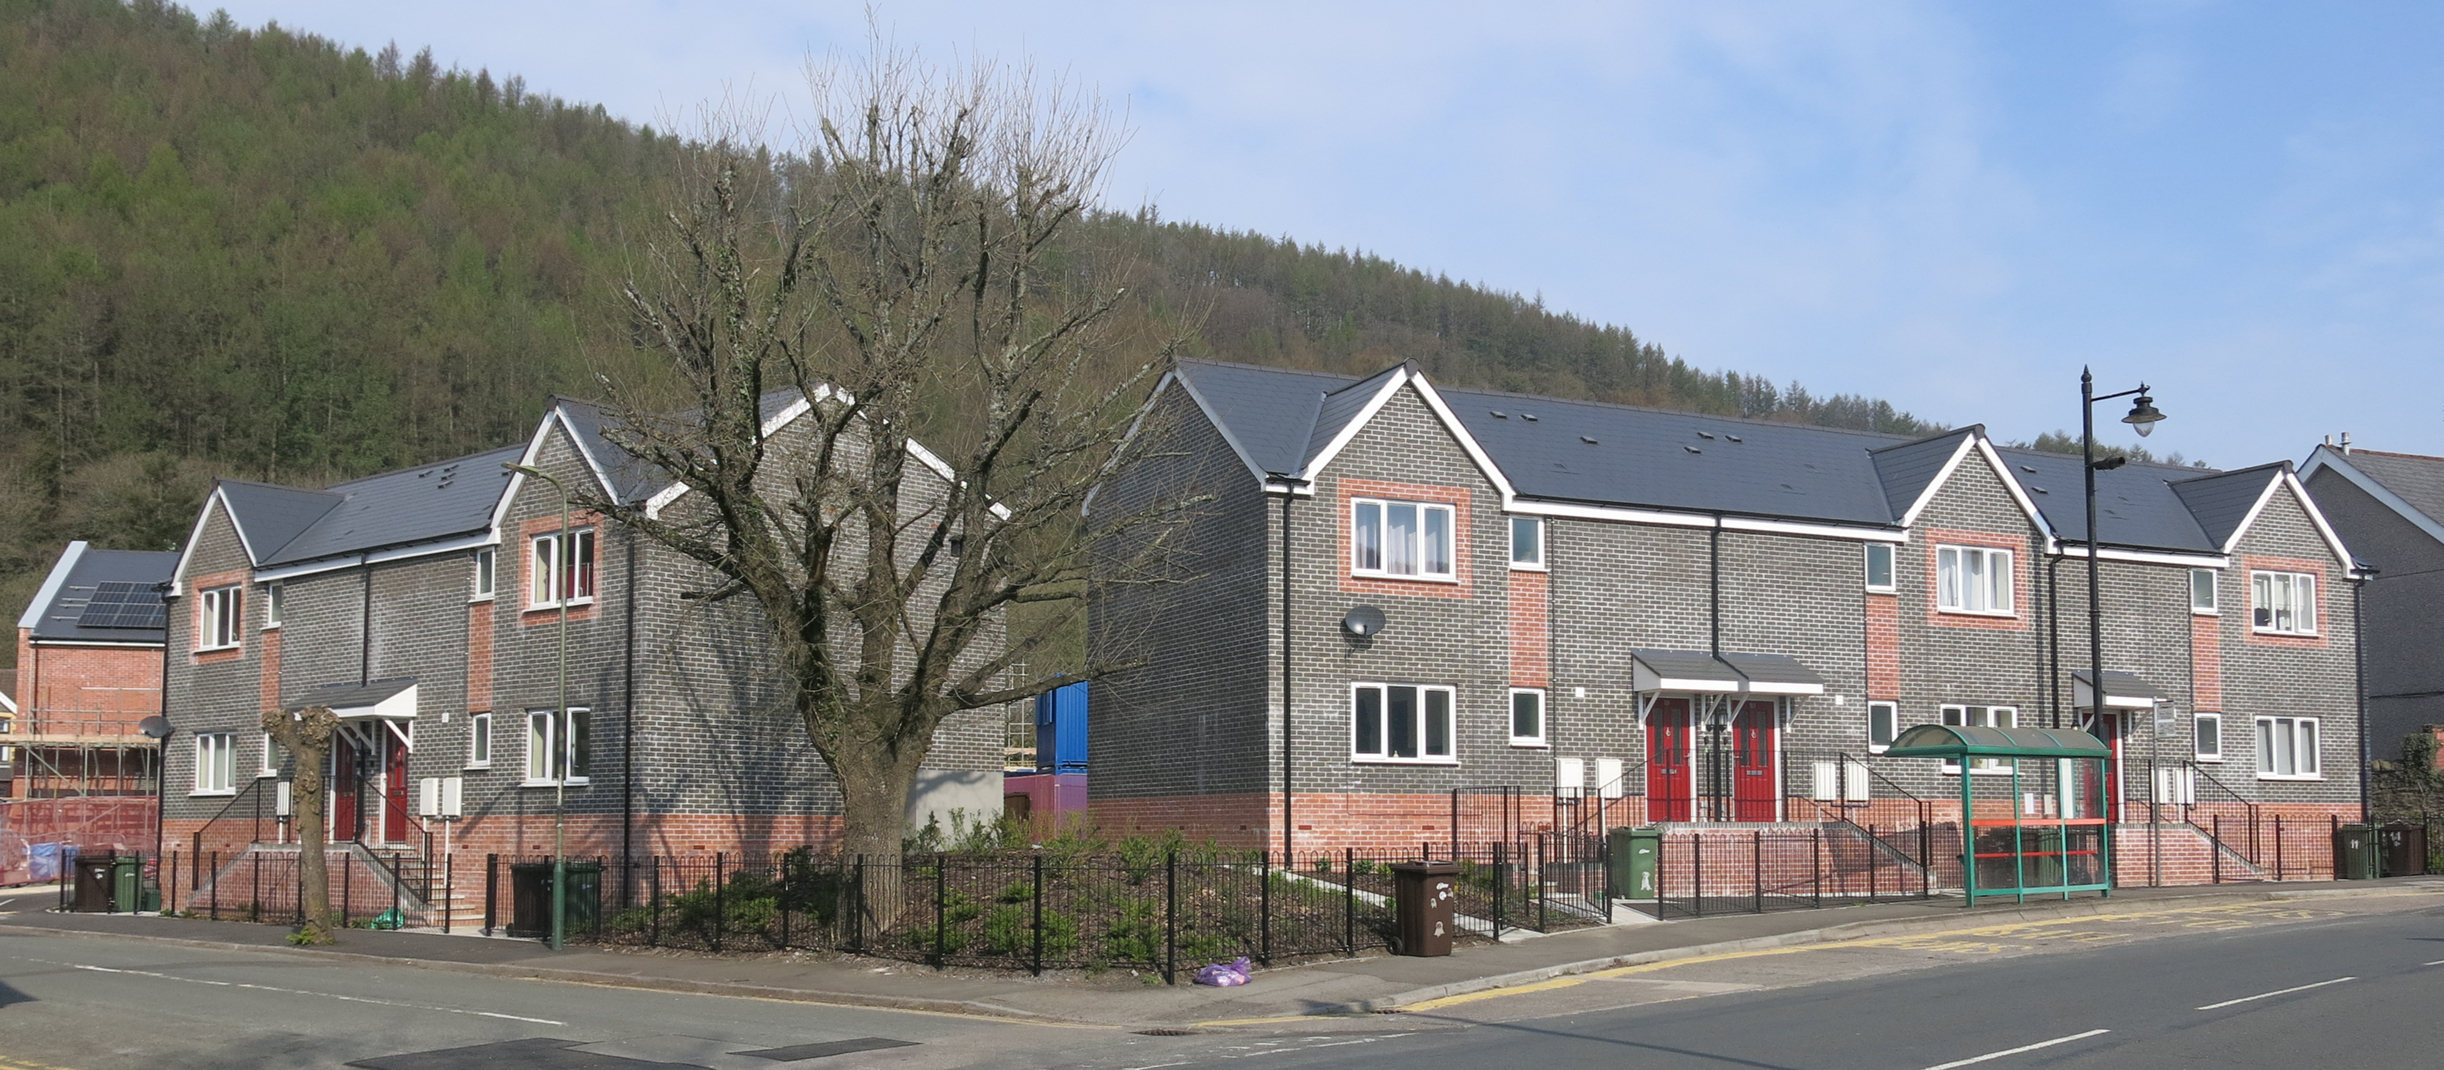 Social housing and primary care health centre Llanbradach, Wales Image 2